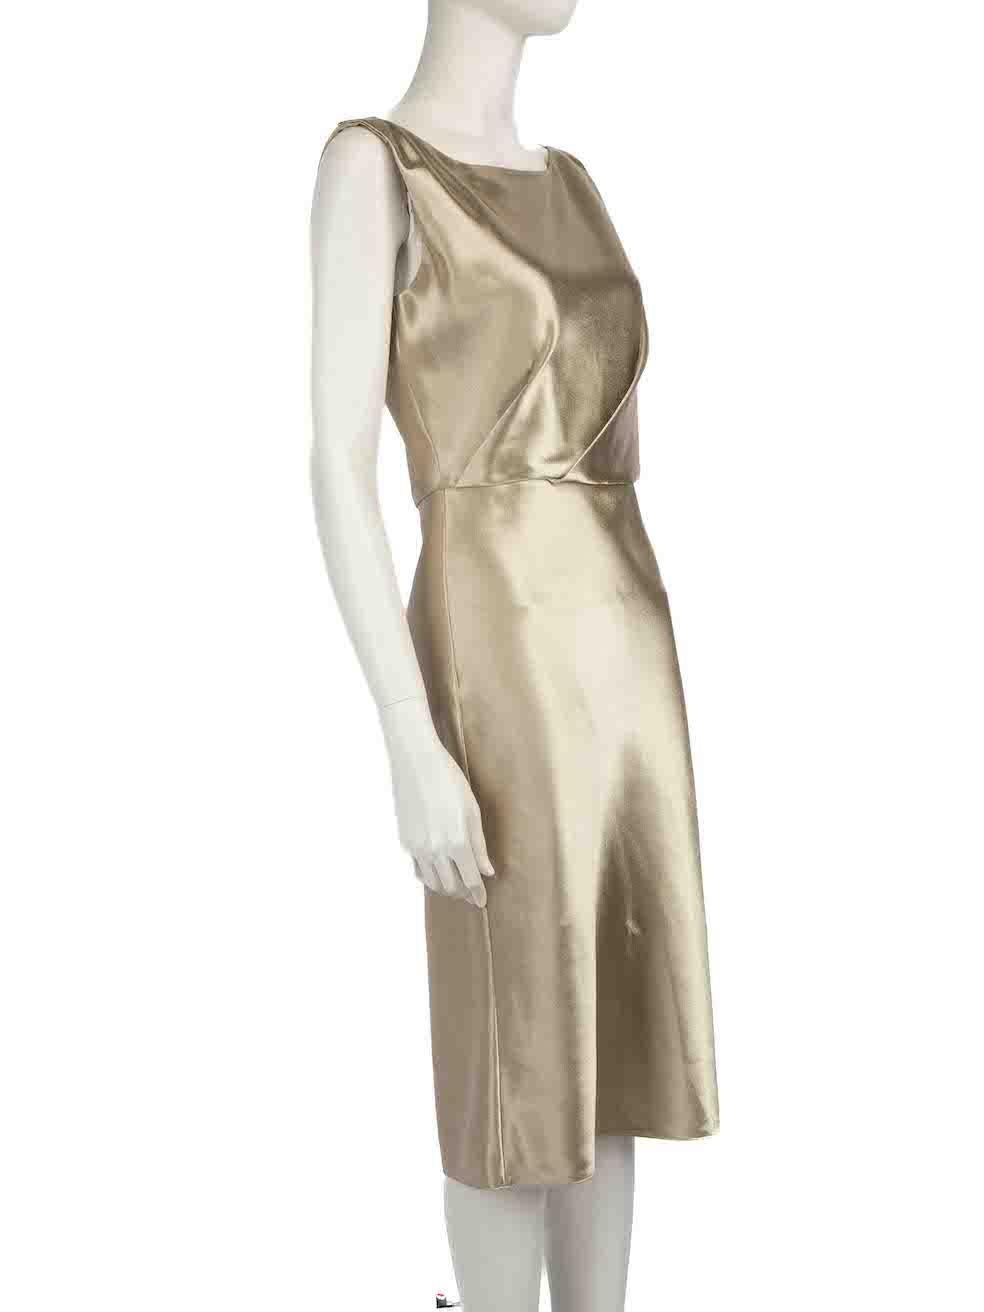 CONDITION is Never worn, with tags. No visible wear to dress is evident, however there are plucks to the weave at the front and the back due to poor storage on this new Nili Lotan designer resale item.
 
 
 
 Details
 
 
 Gold
 
 Polyester
 
 Midi